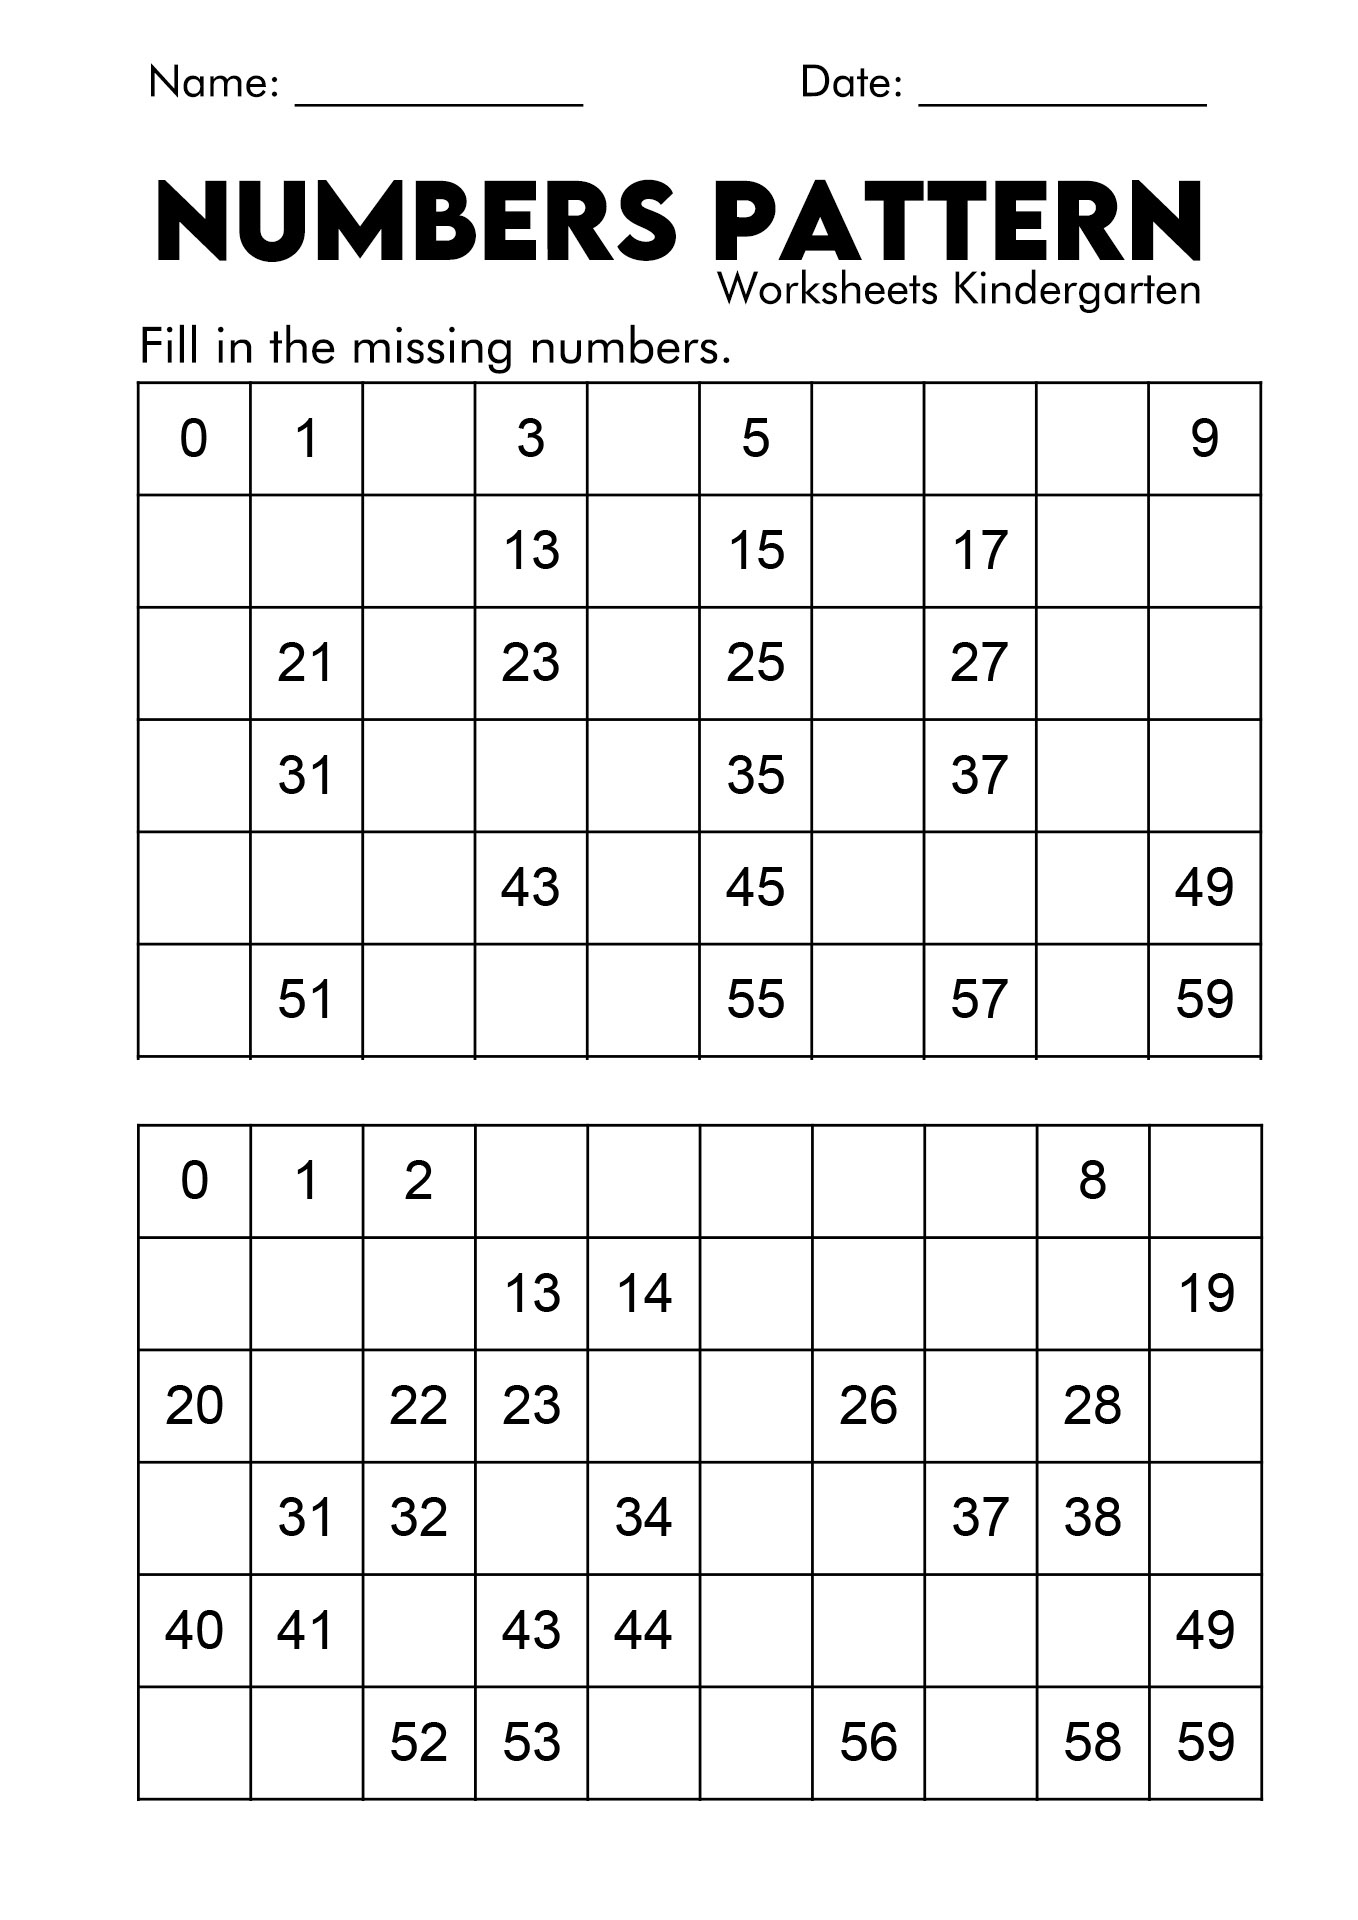 Get Finding Patterns In Math Worksheets Images The Math